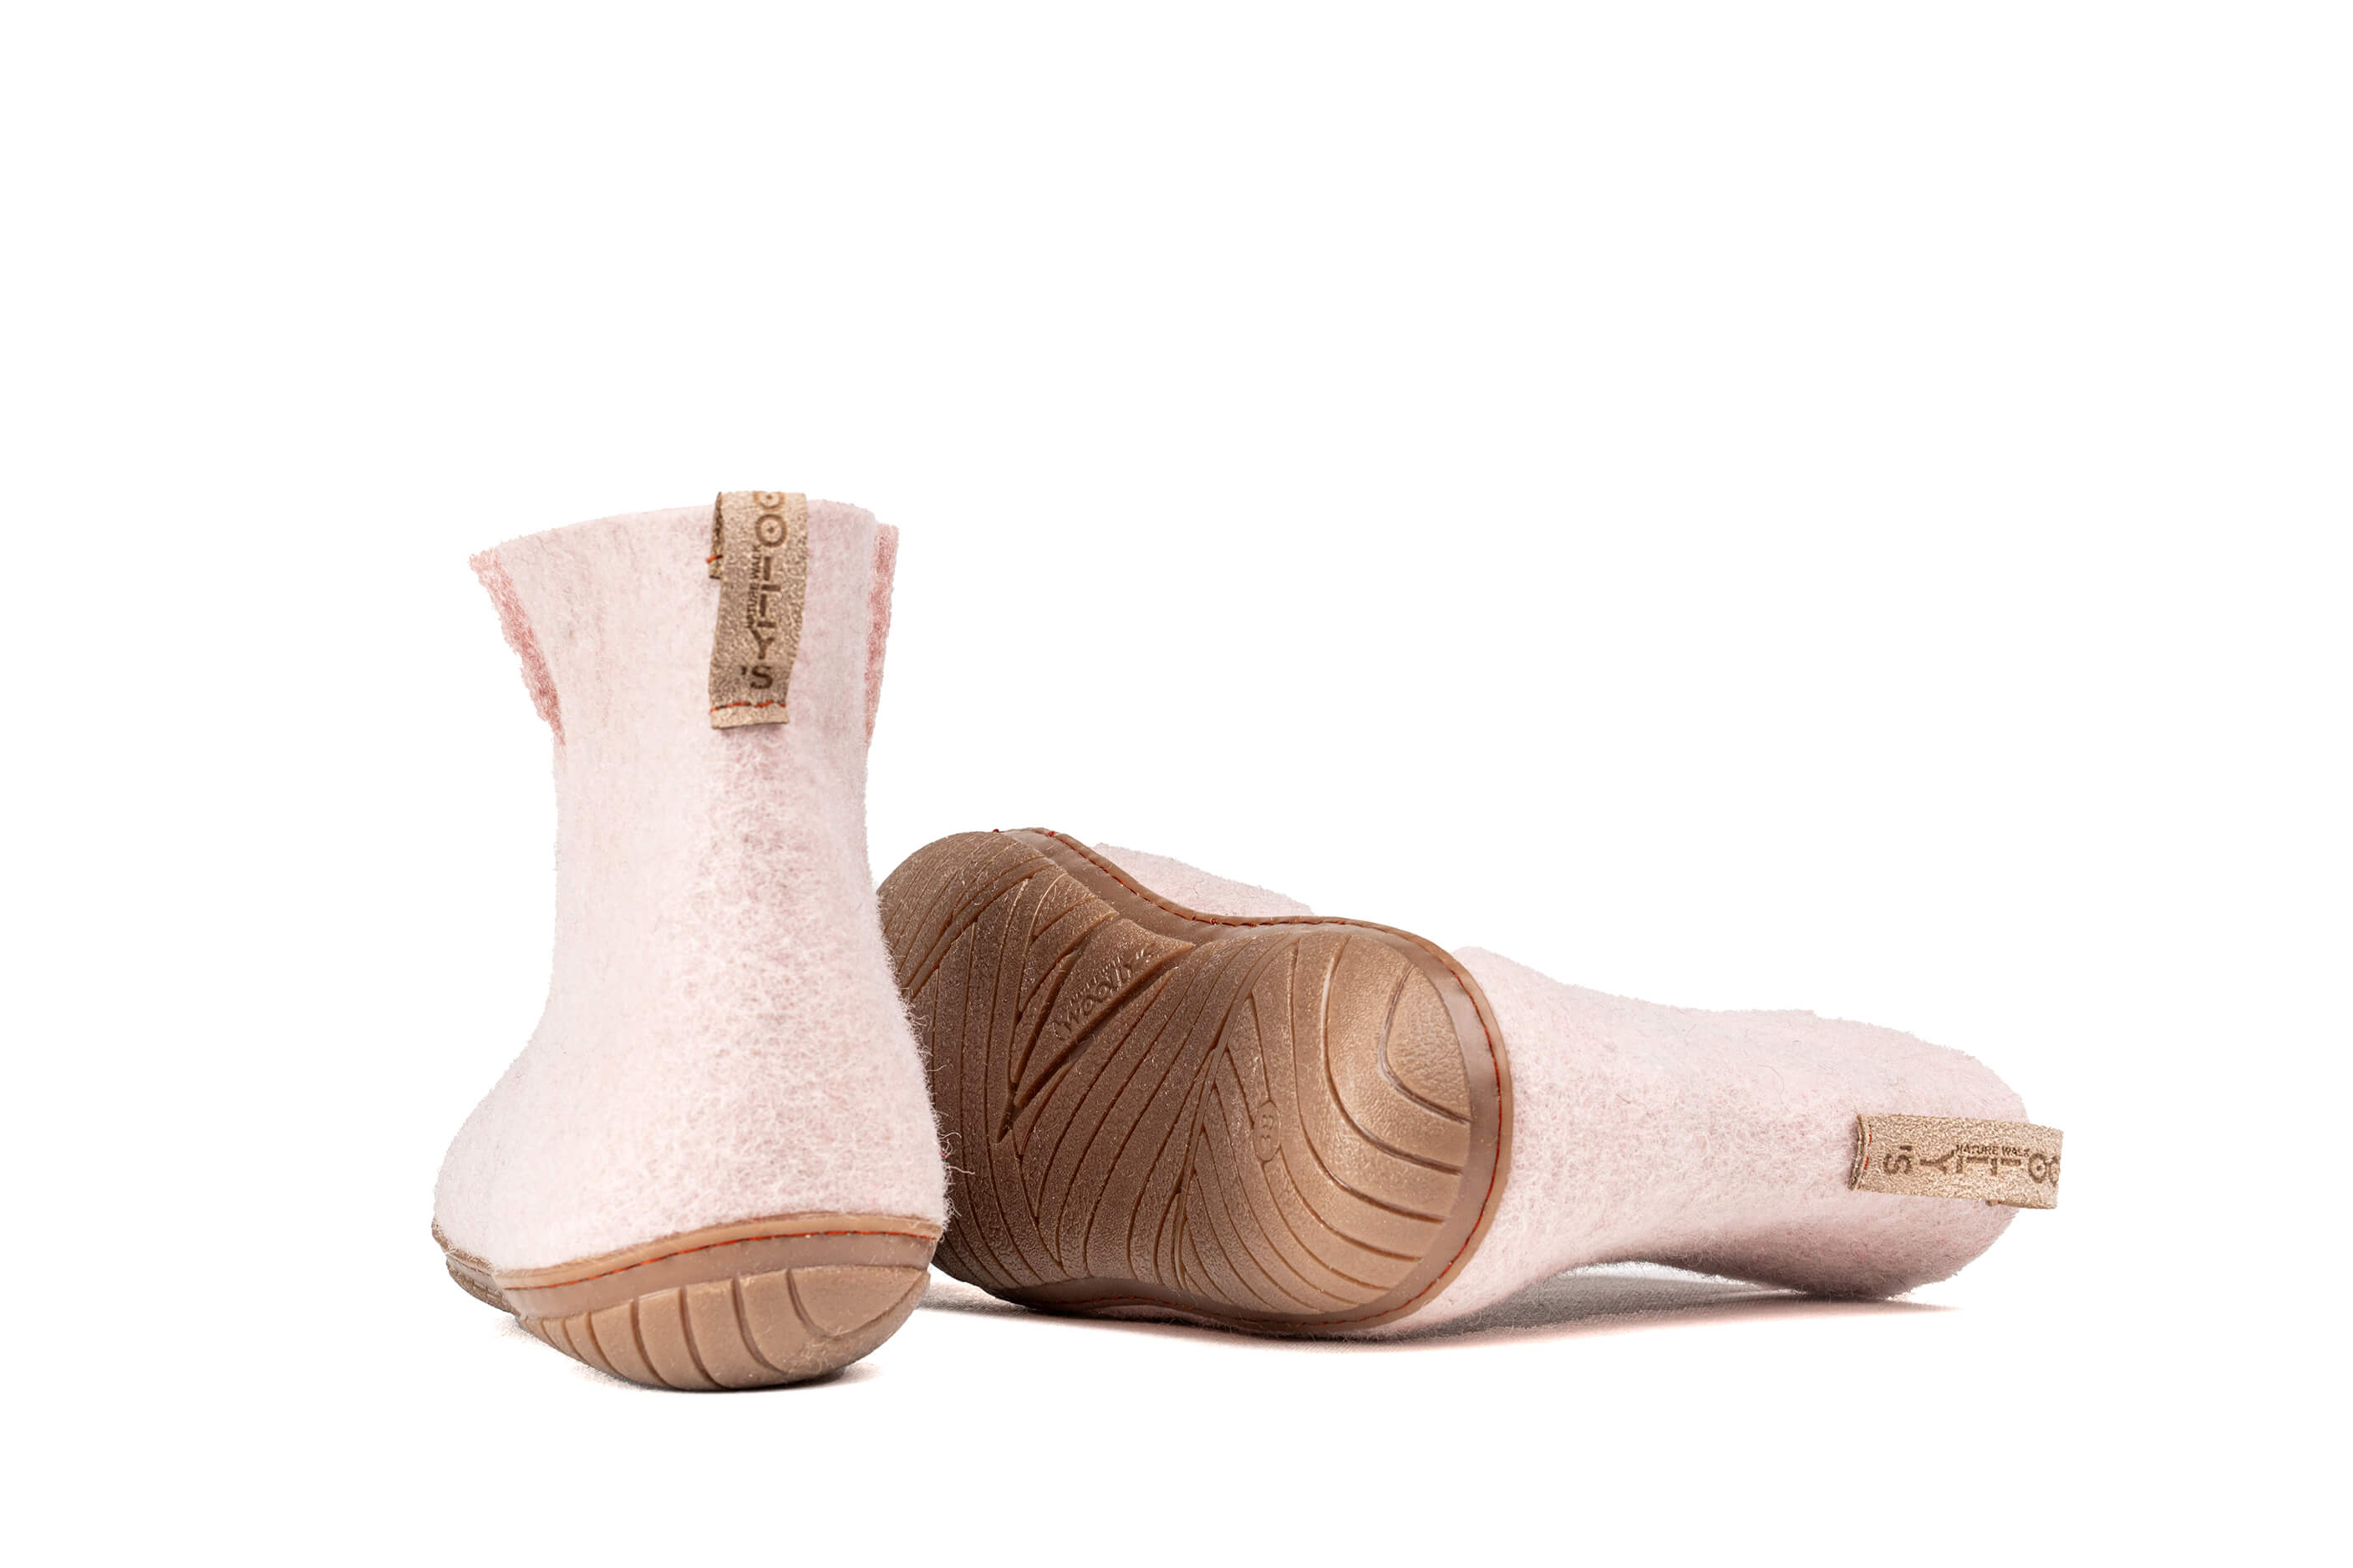 Outdoor Low Boots With Rubber Sole - Baby Pink